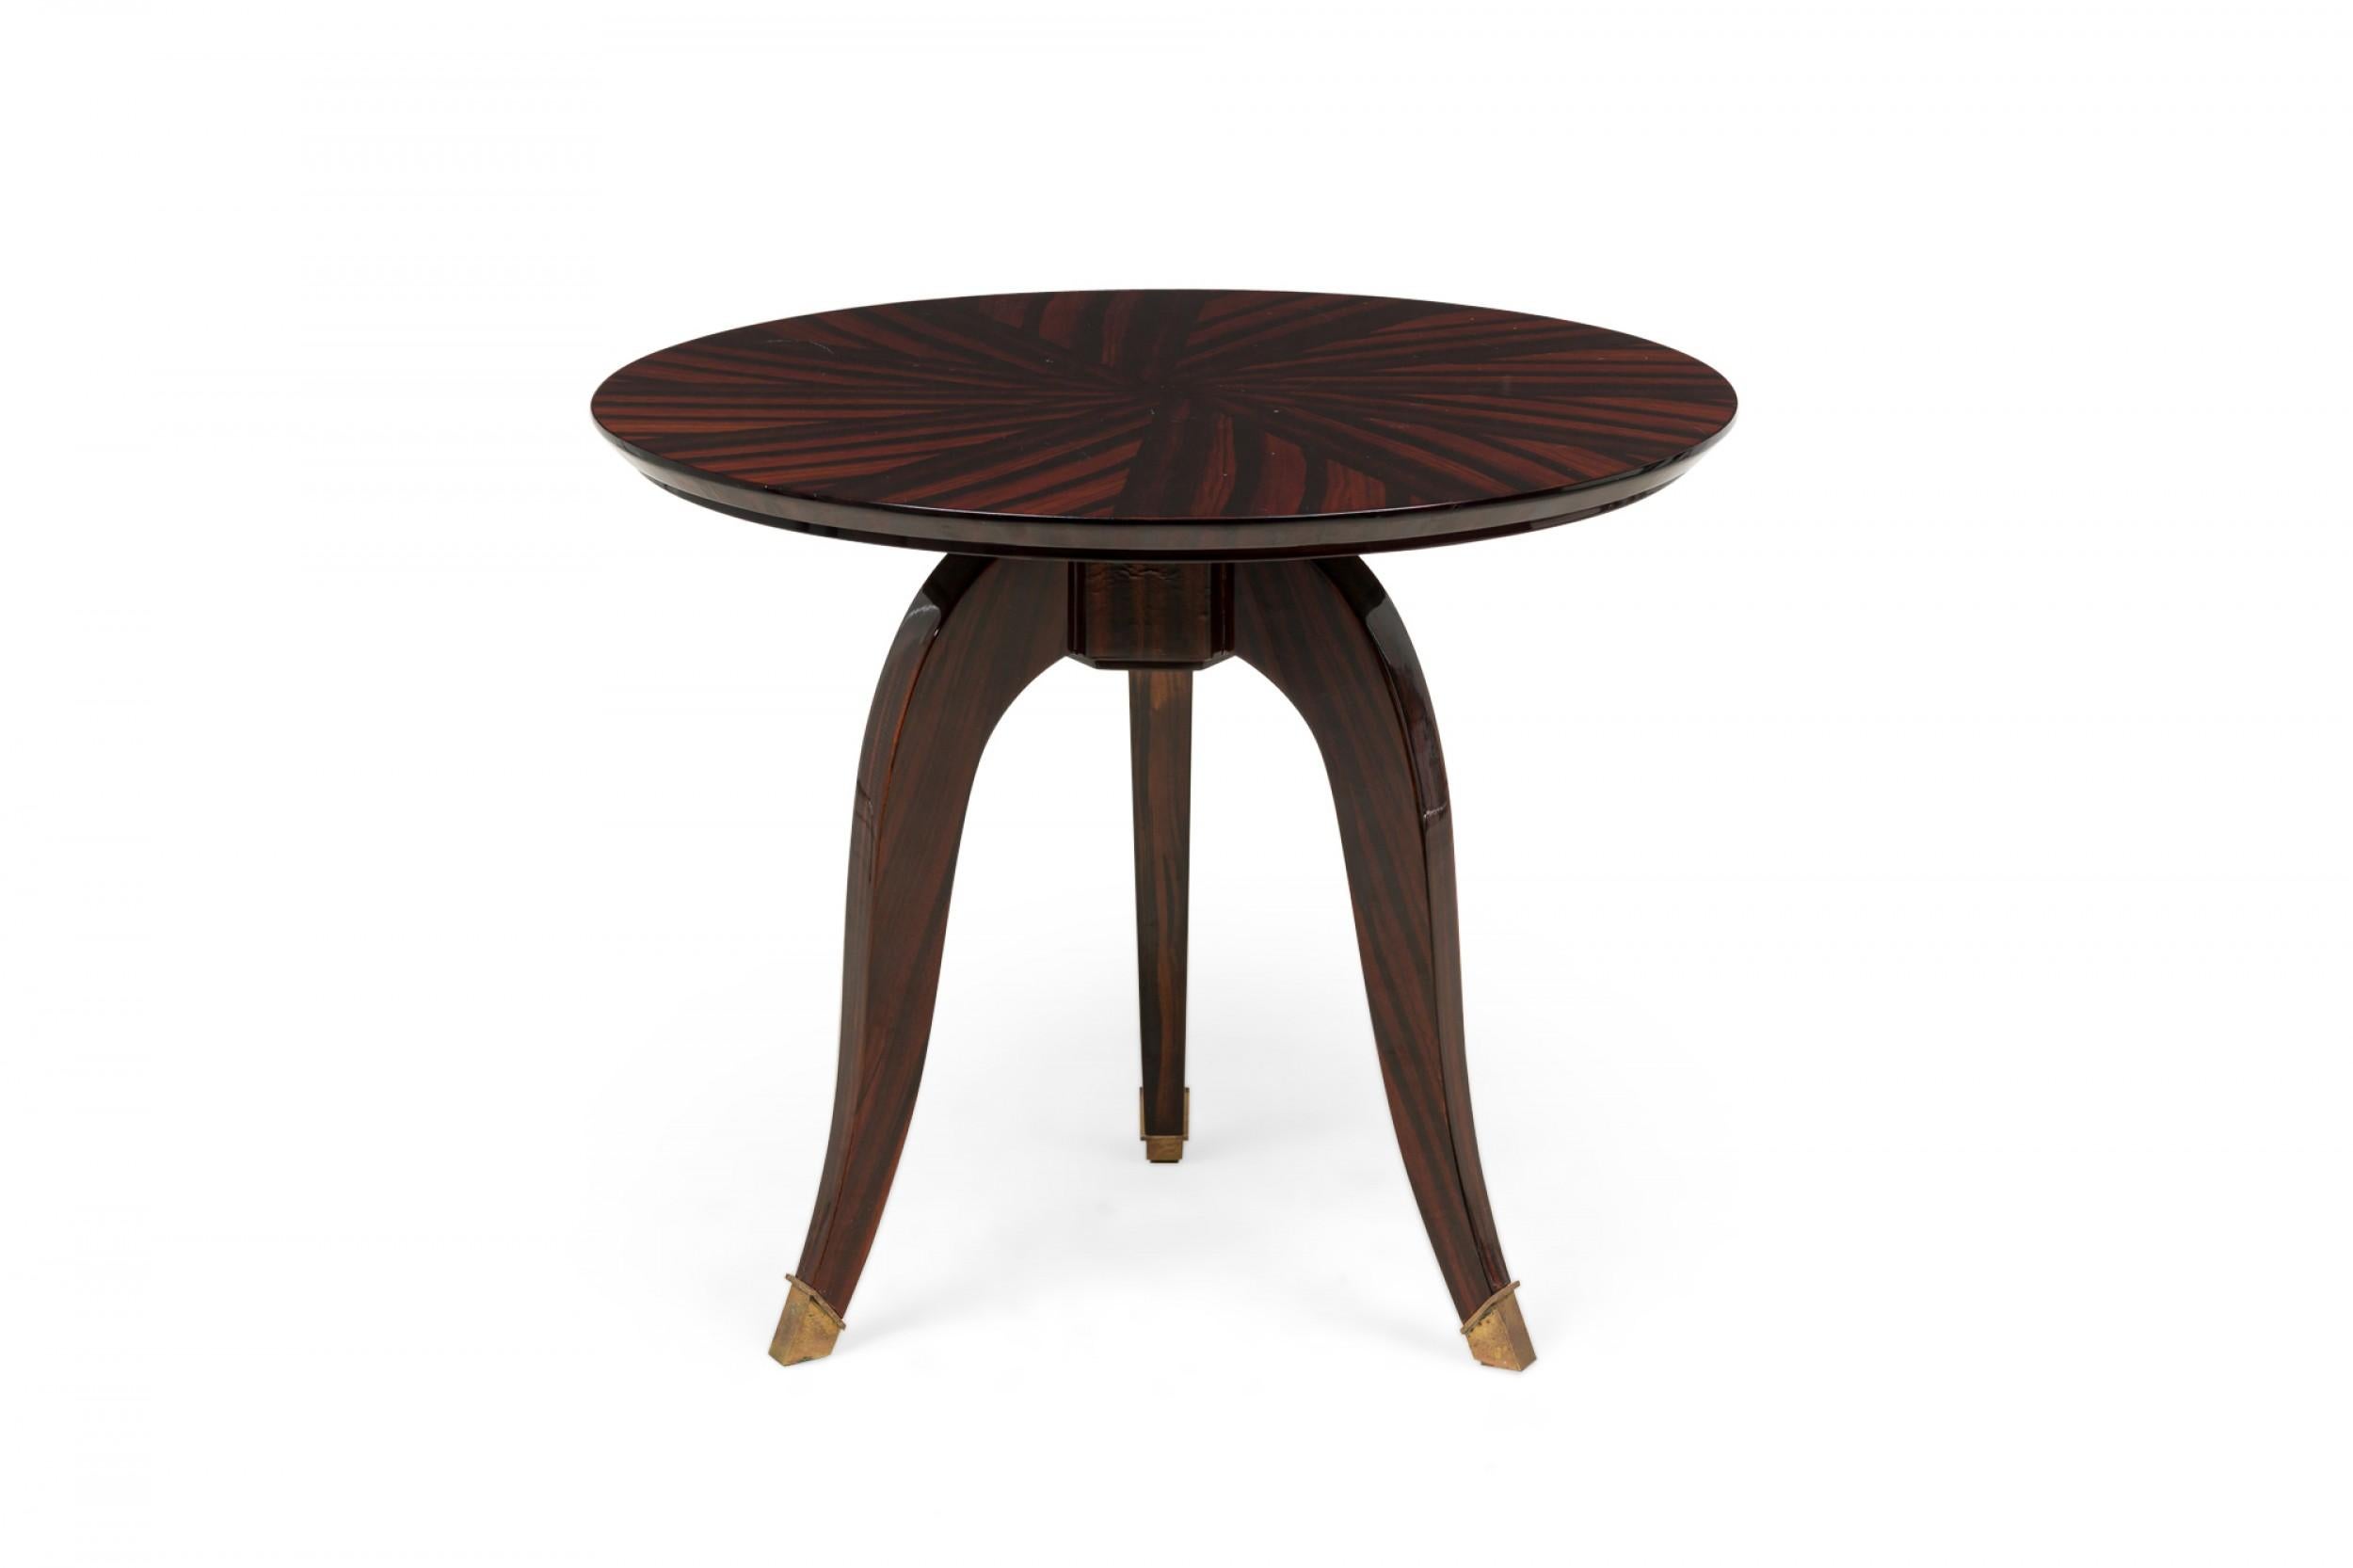 Art Deco French circular end / side table with a beveled top inlaid with a contrasting 